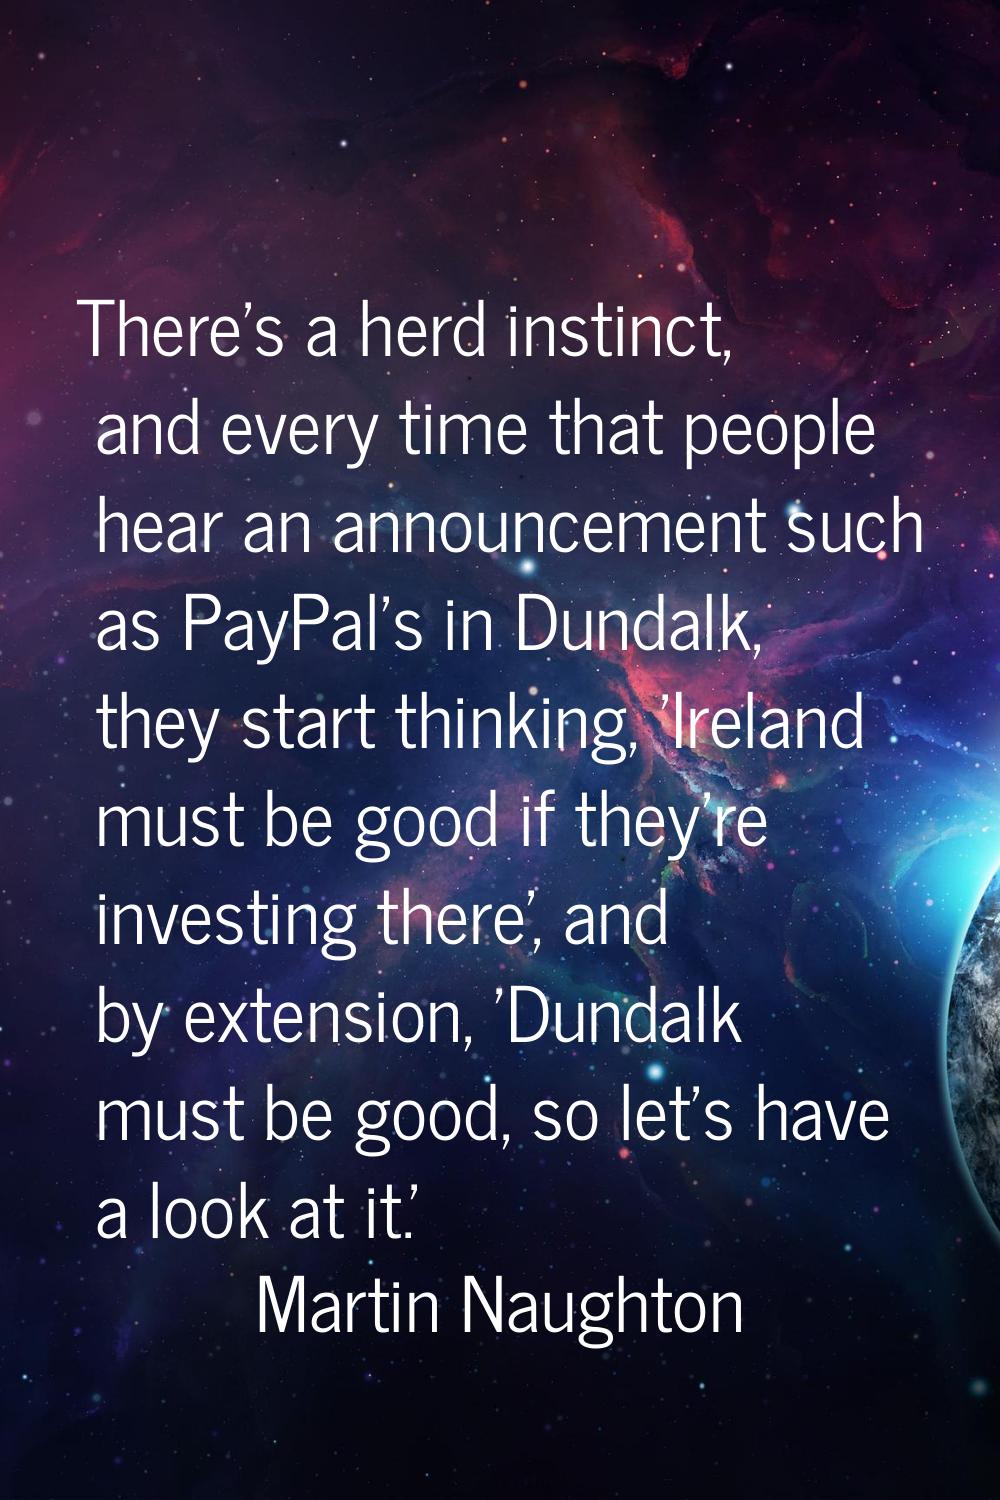 There's a herd instinct, and every time that people hear an announcement such as PayPal's in Dundal